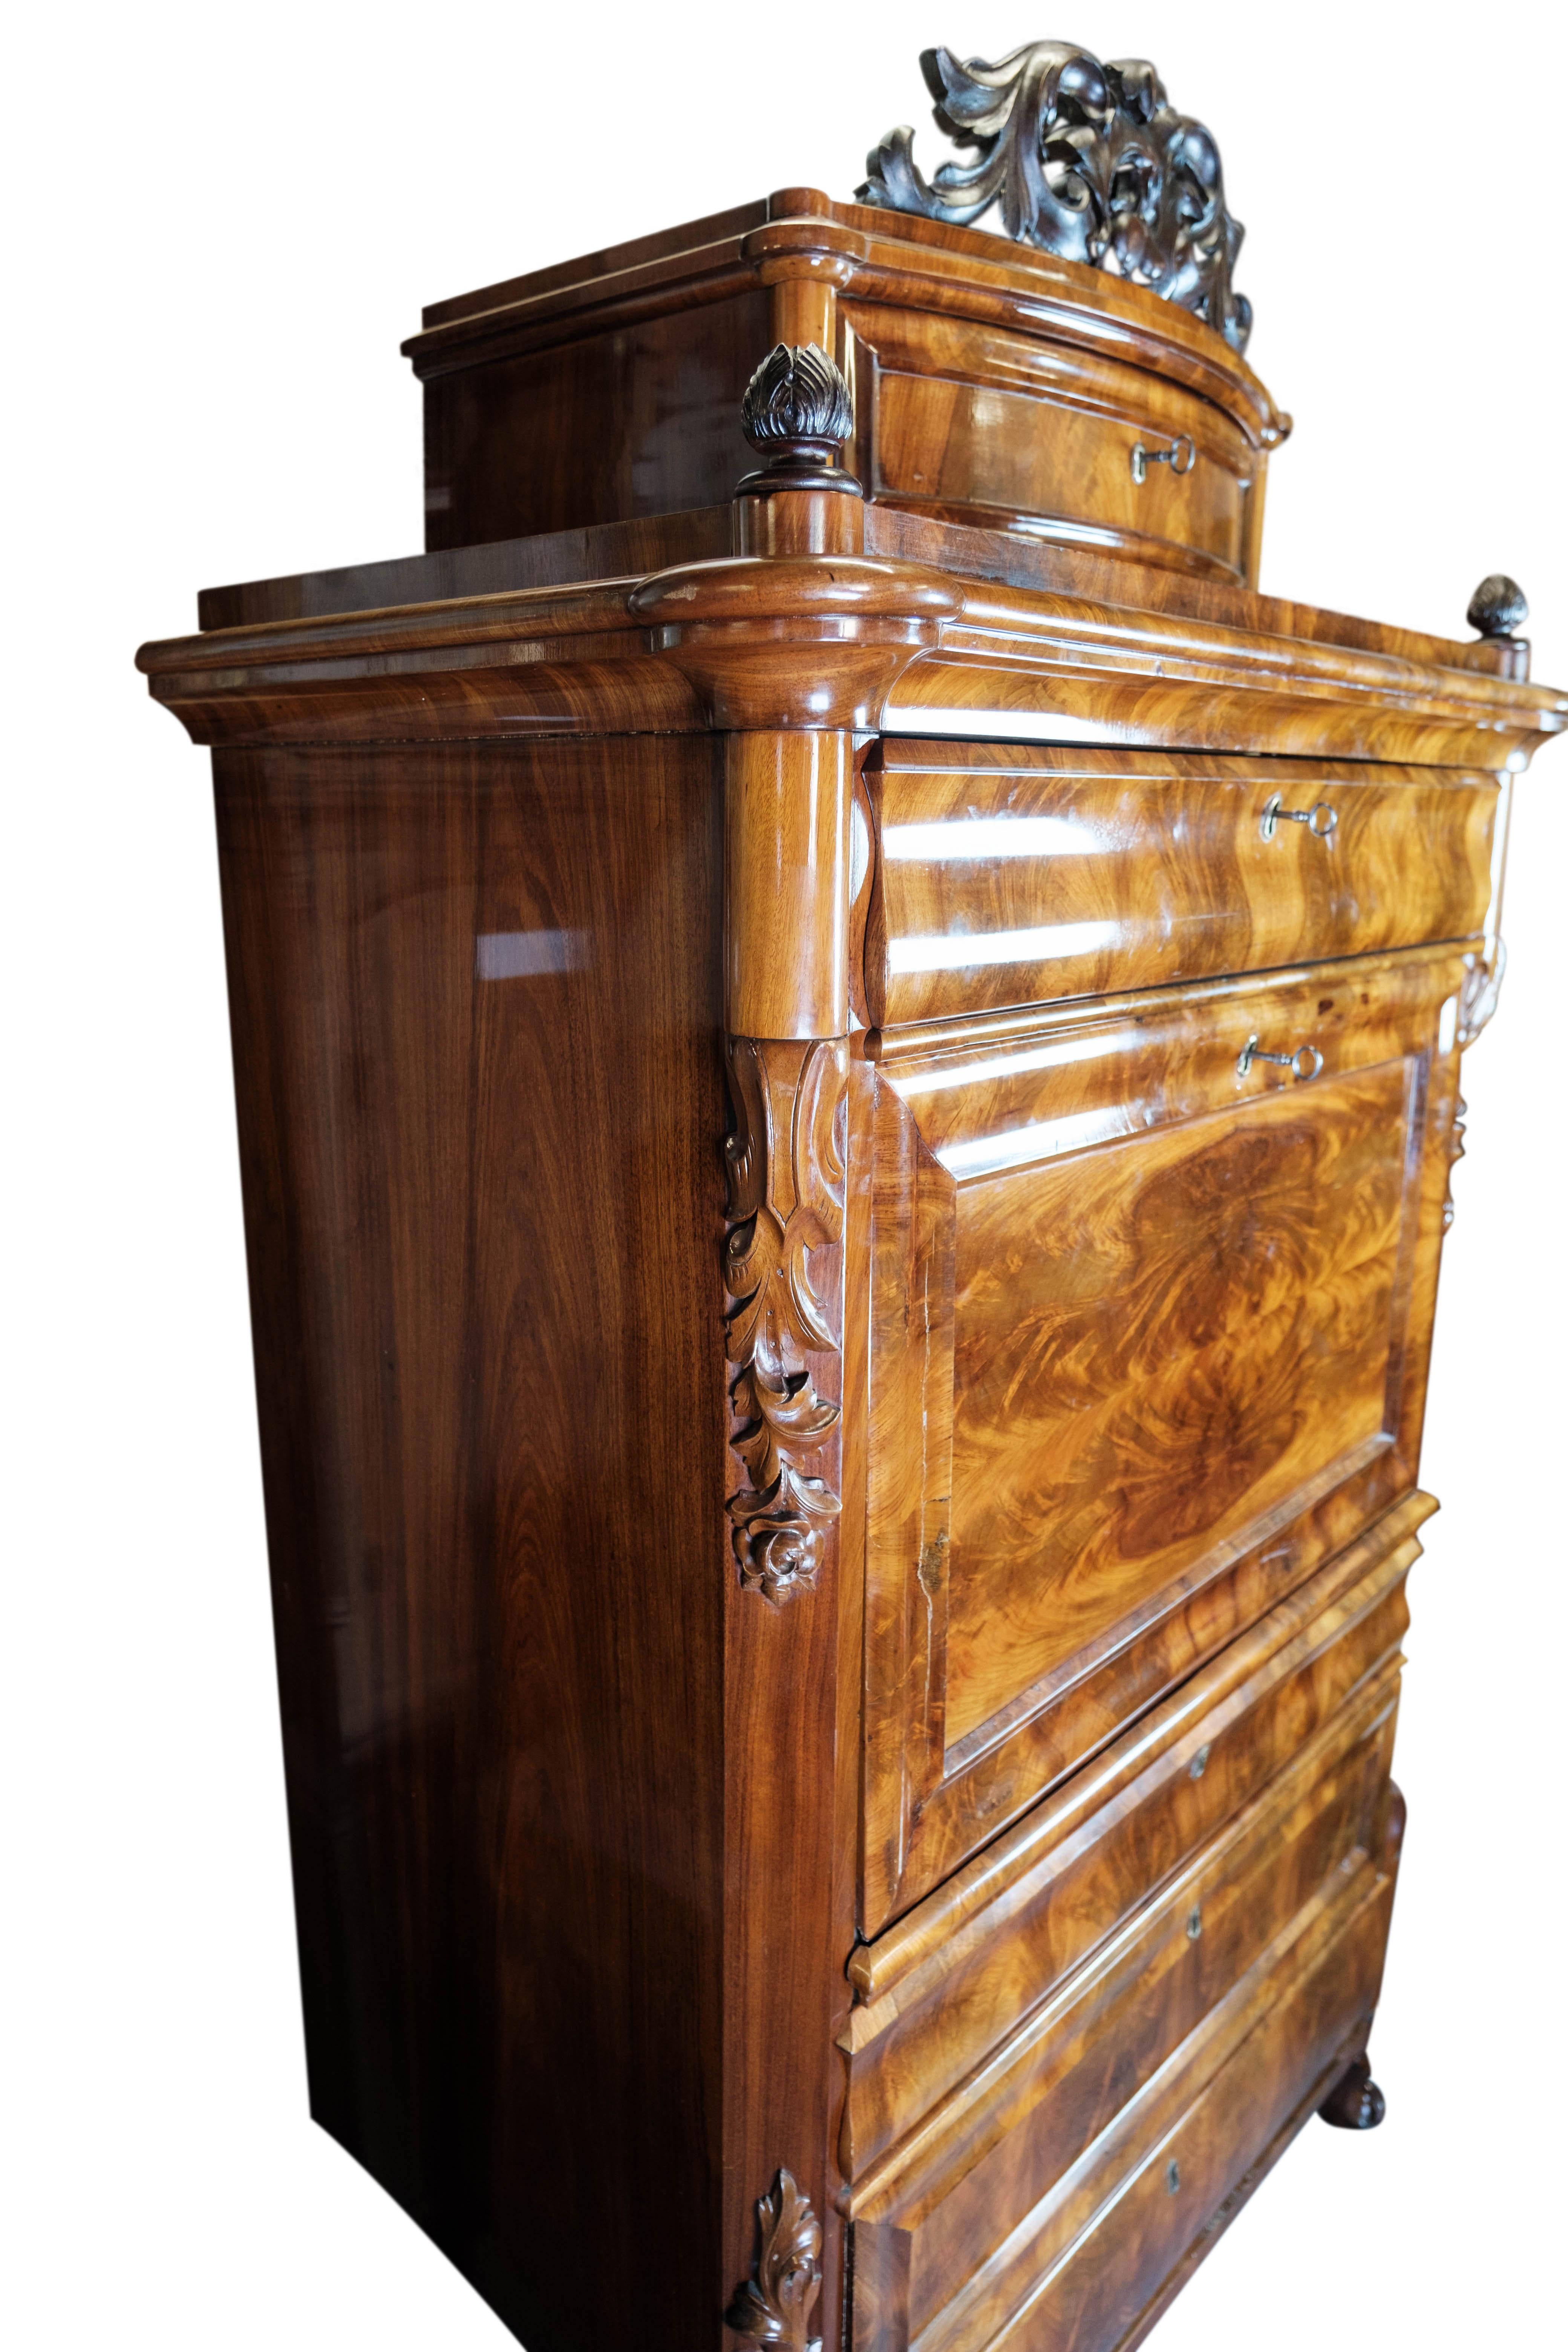 Large cabinet of mahogany decorated with carvings, in great antique condition from the 1860s.